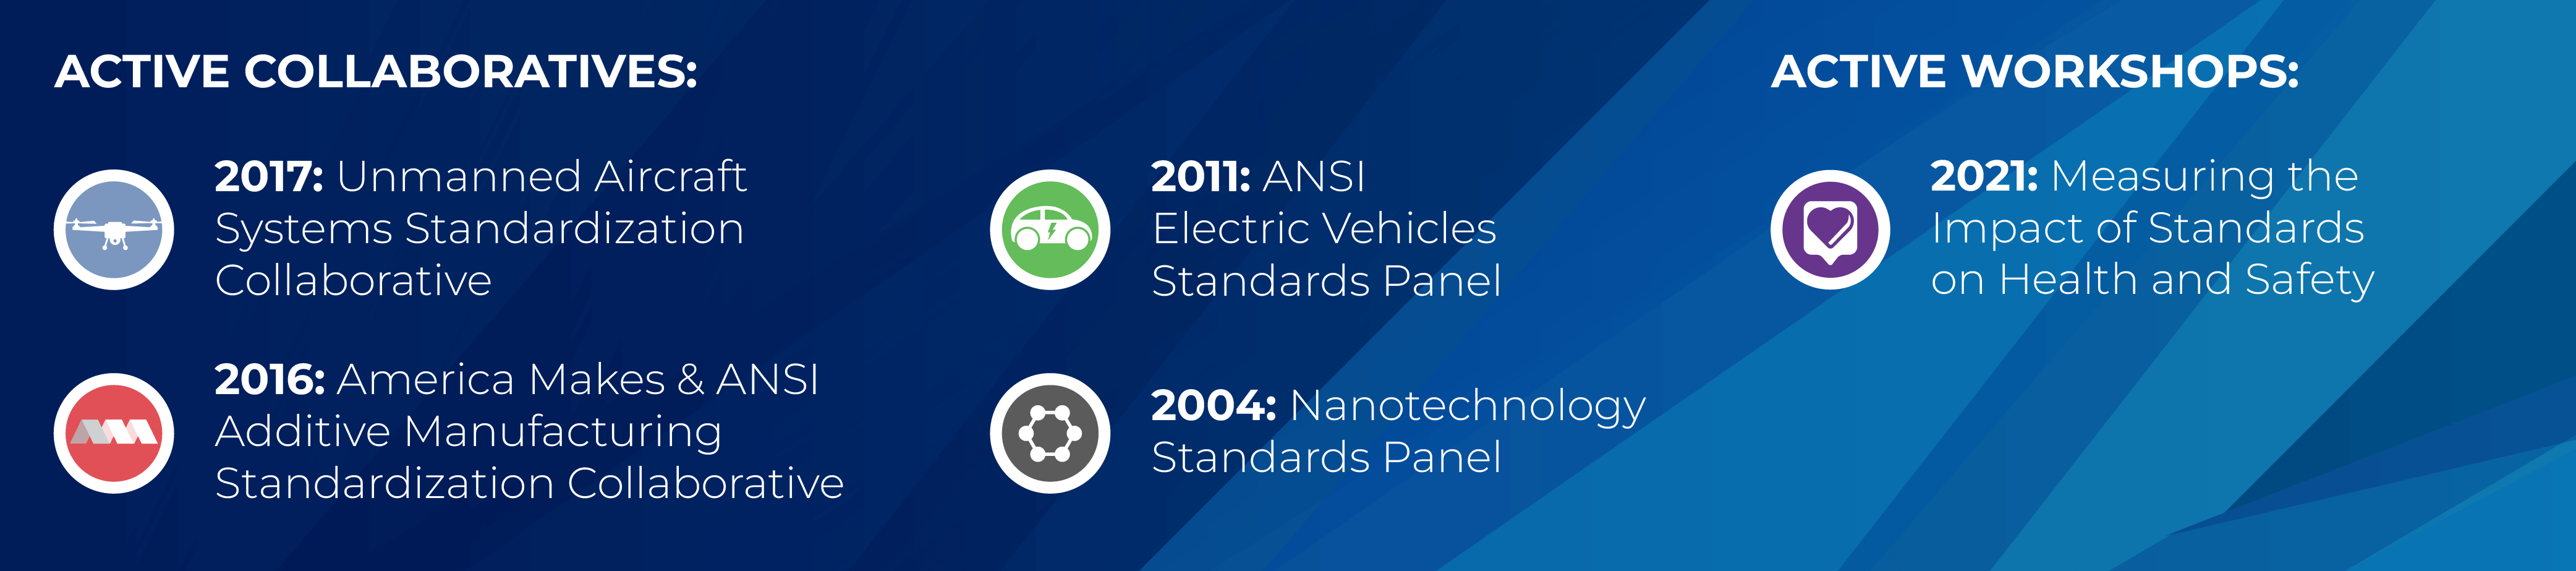 Infographic showing ANSI standards coordination activities.